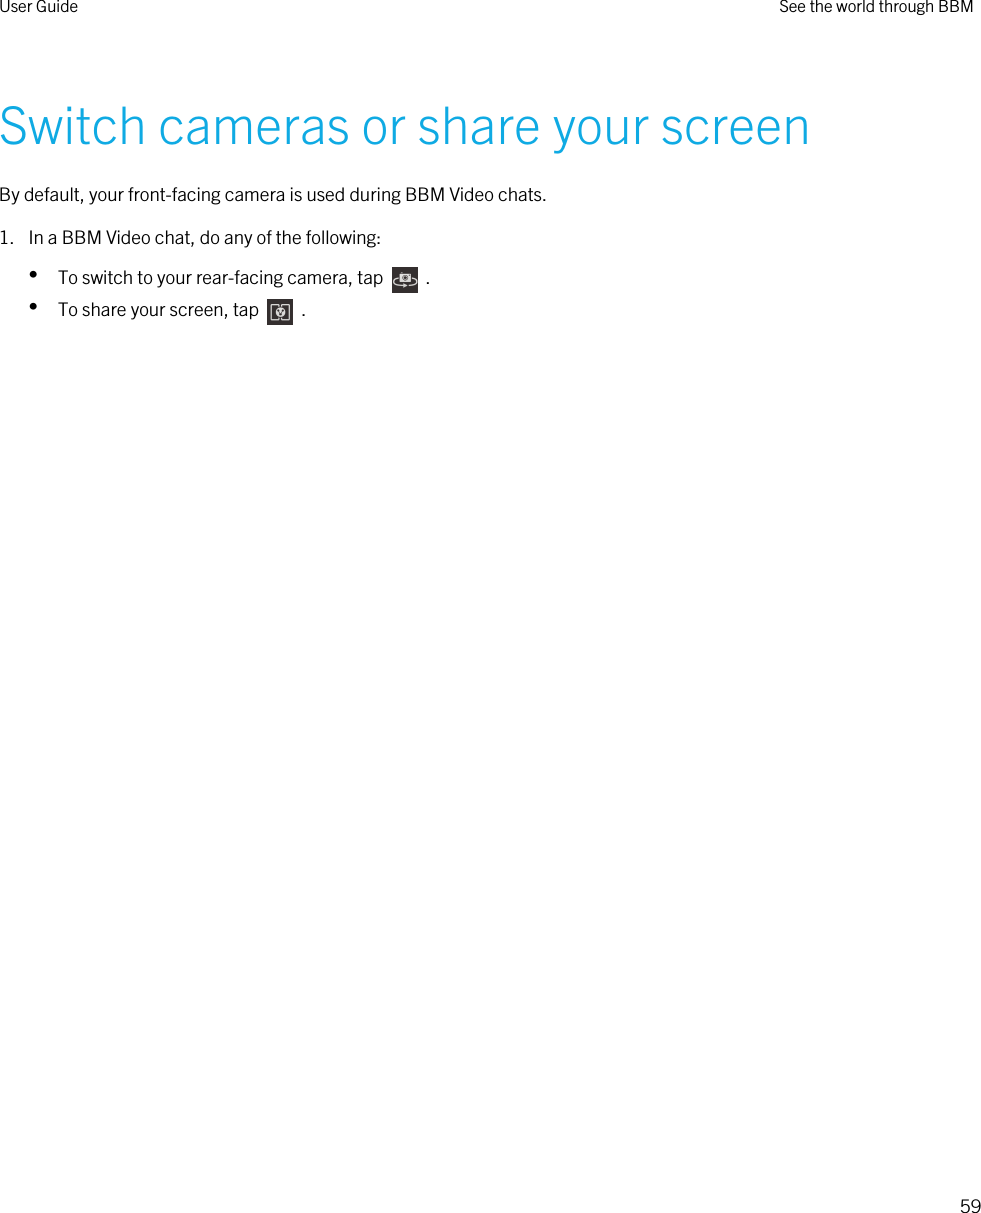 Switch cameras or share your screenBy default, your front-facing camera is used during BBM Video chats.1. In a BBM Video chat, do any of the following:•To switch to your rear-facing camera, tap    .•To share your screen, tap    .User Guide See the world through BBM59 